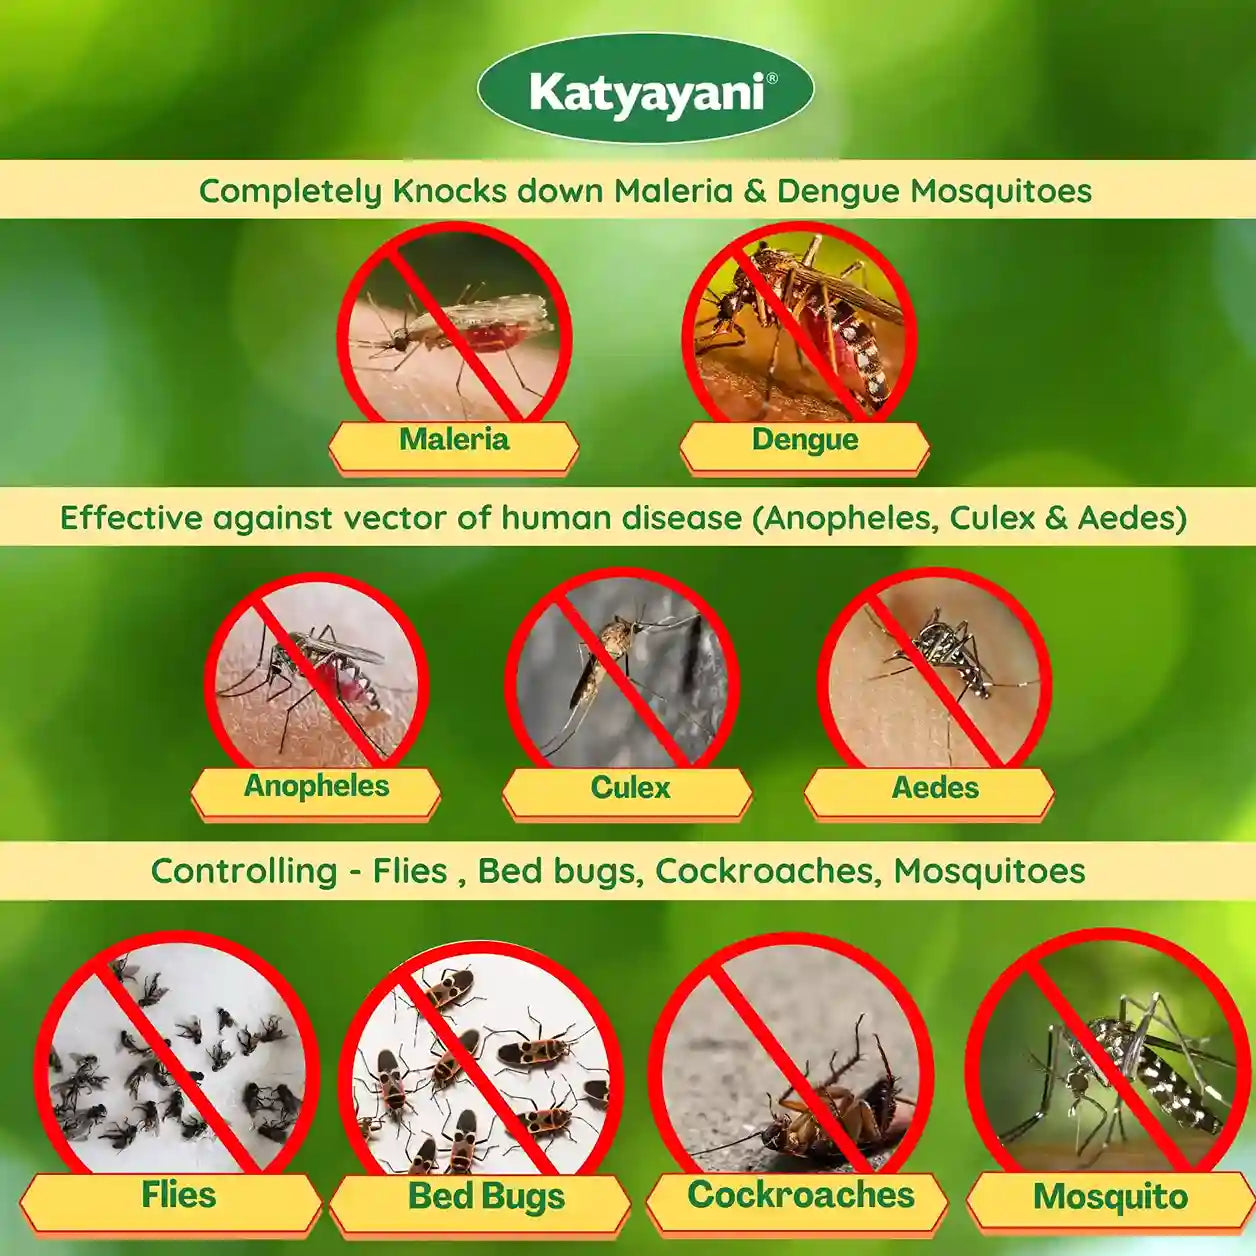 KATYAYANI DEL | DELTAMETHRIN 1.25% ULV | CHEMICAL INSECTICIDE CONTROLLING FLIES, BED BUGS & MORE